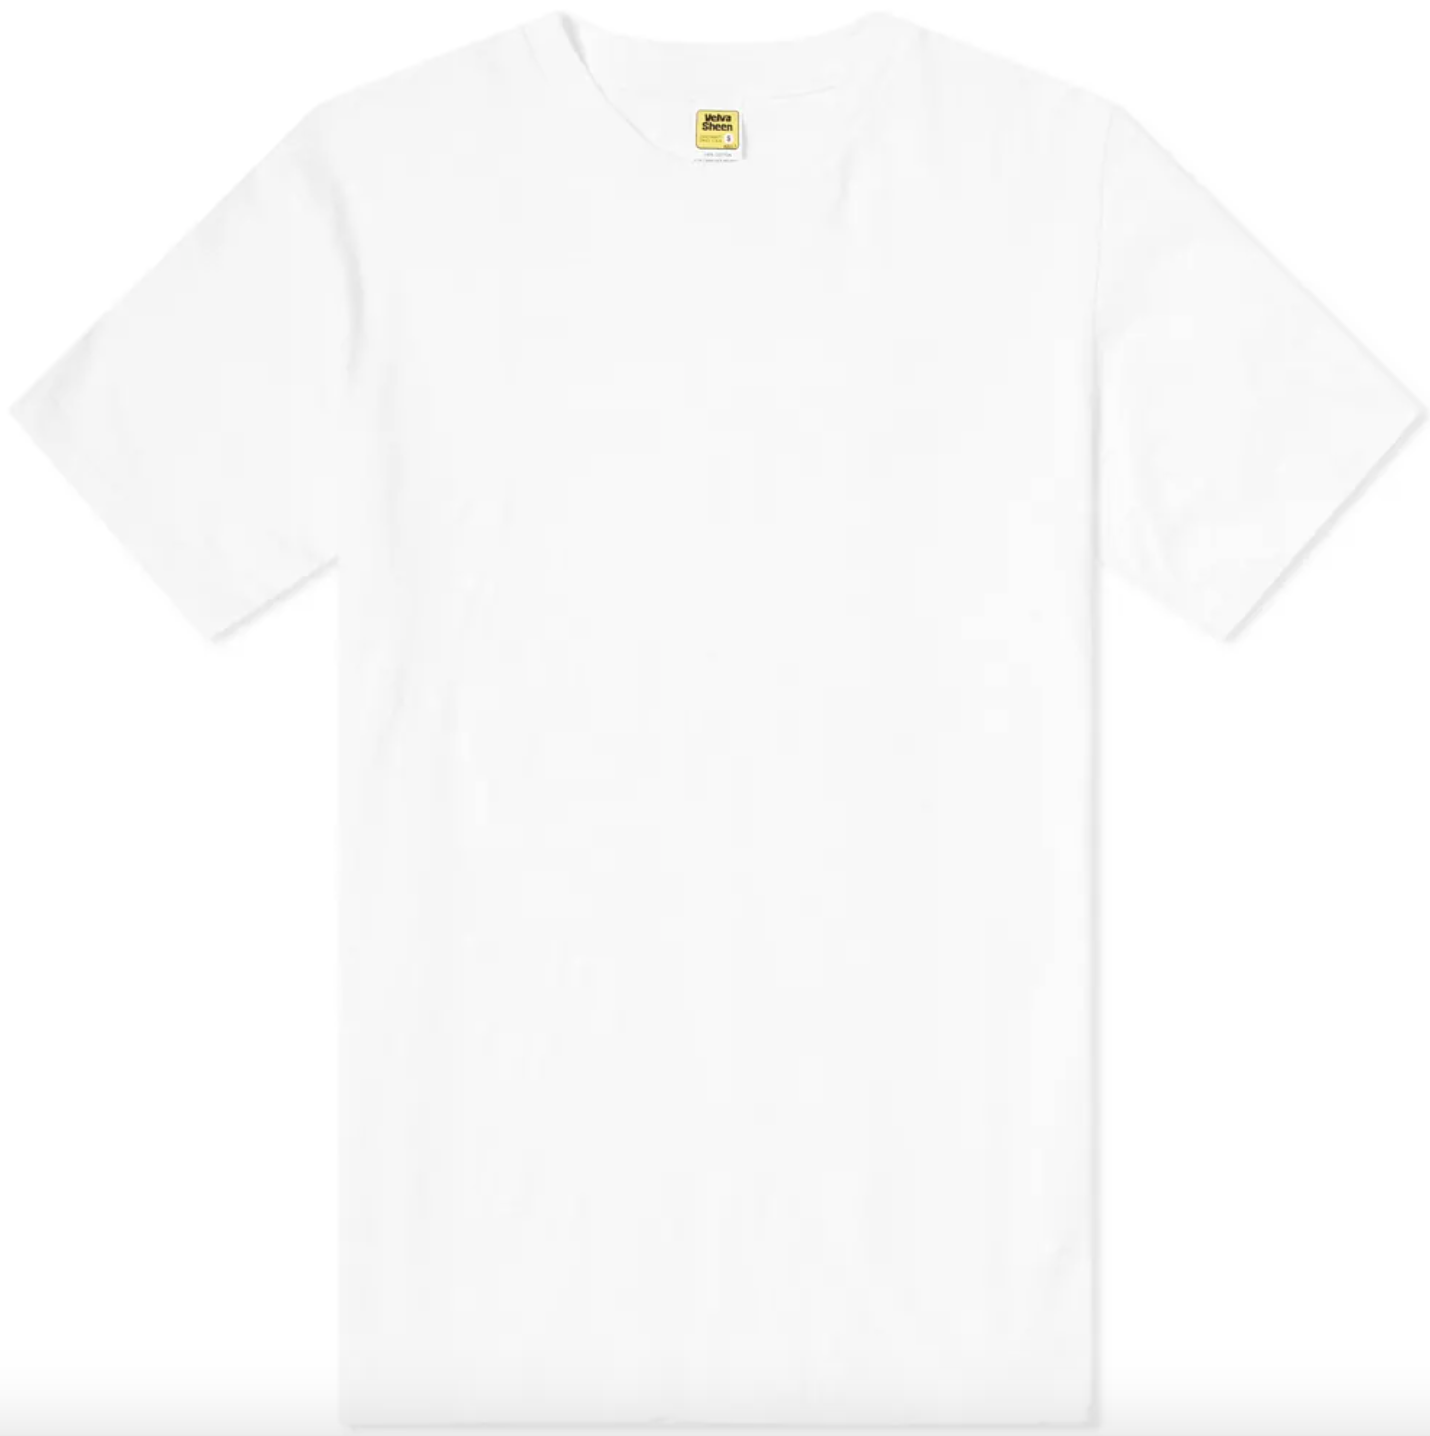 Buy > 100 pack white t shirts > in stock